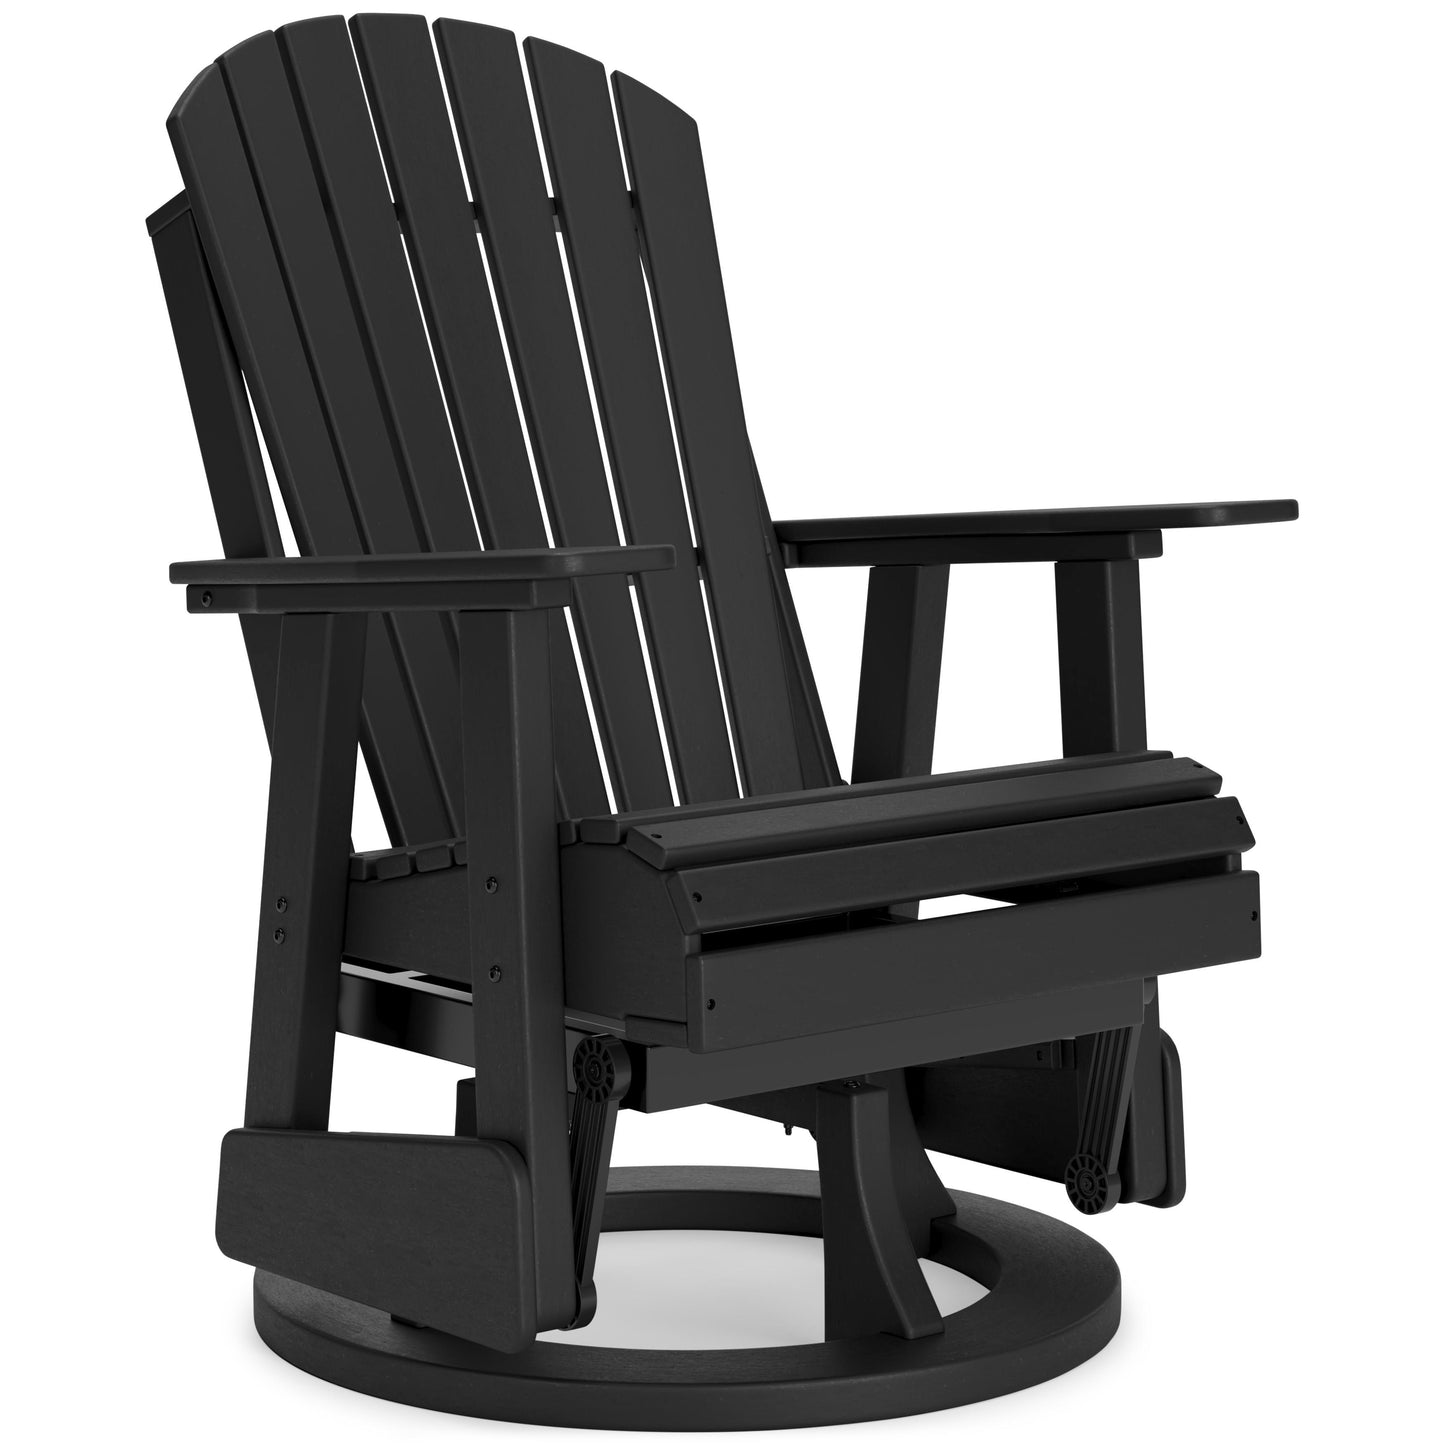 Signature Design by Ashley Outdoor Seating Chairs P108-820 IMAGE 1